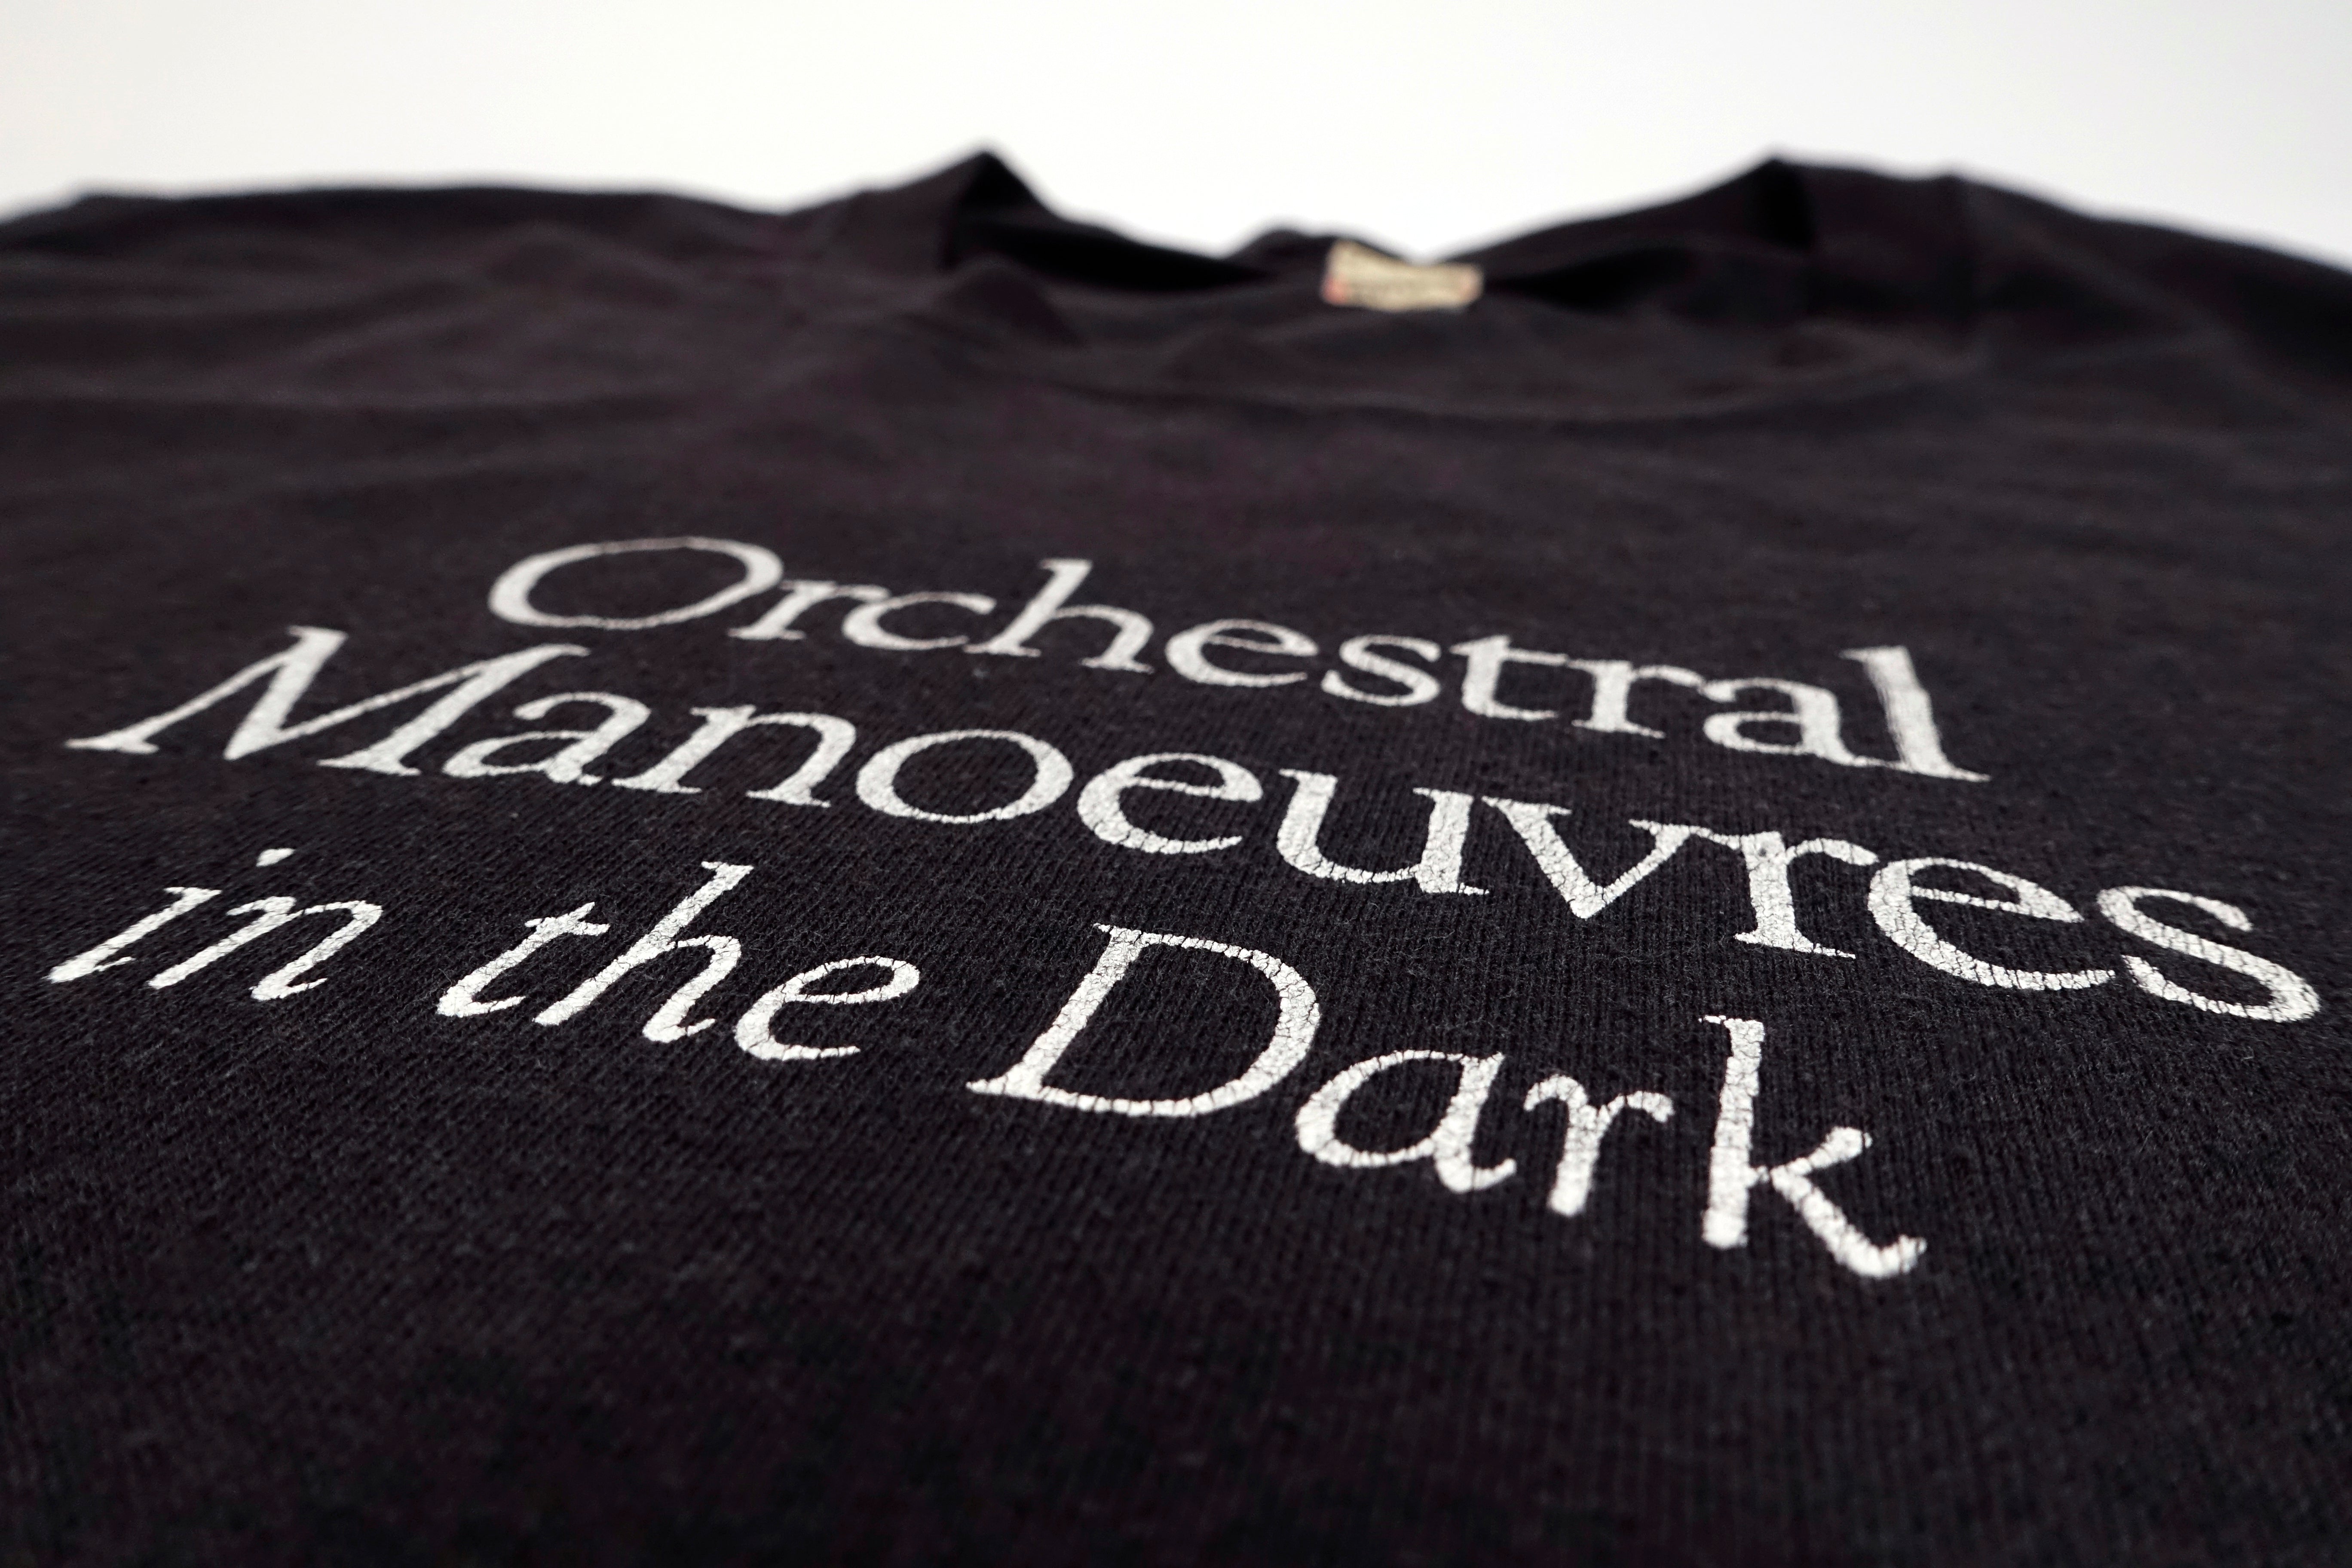 Orchestral Manoeuvres In The Dark (OMD) - Electricity Almost 80's Tour Shirt Size XL